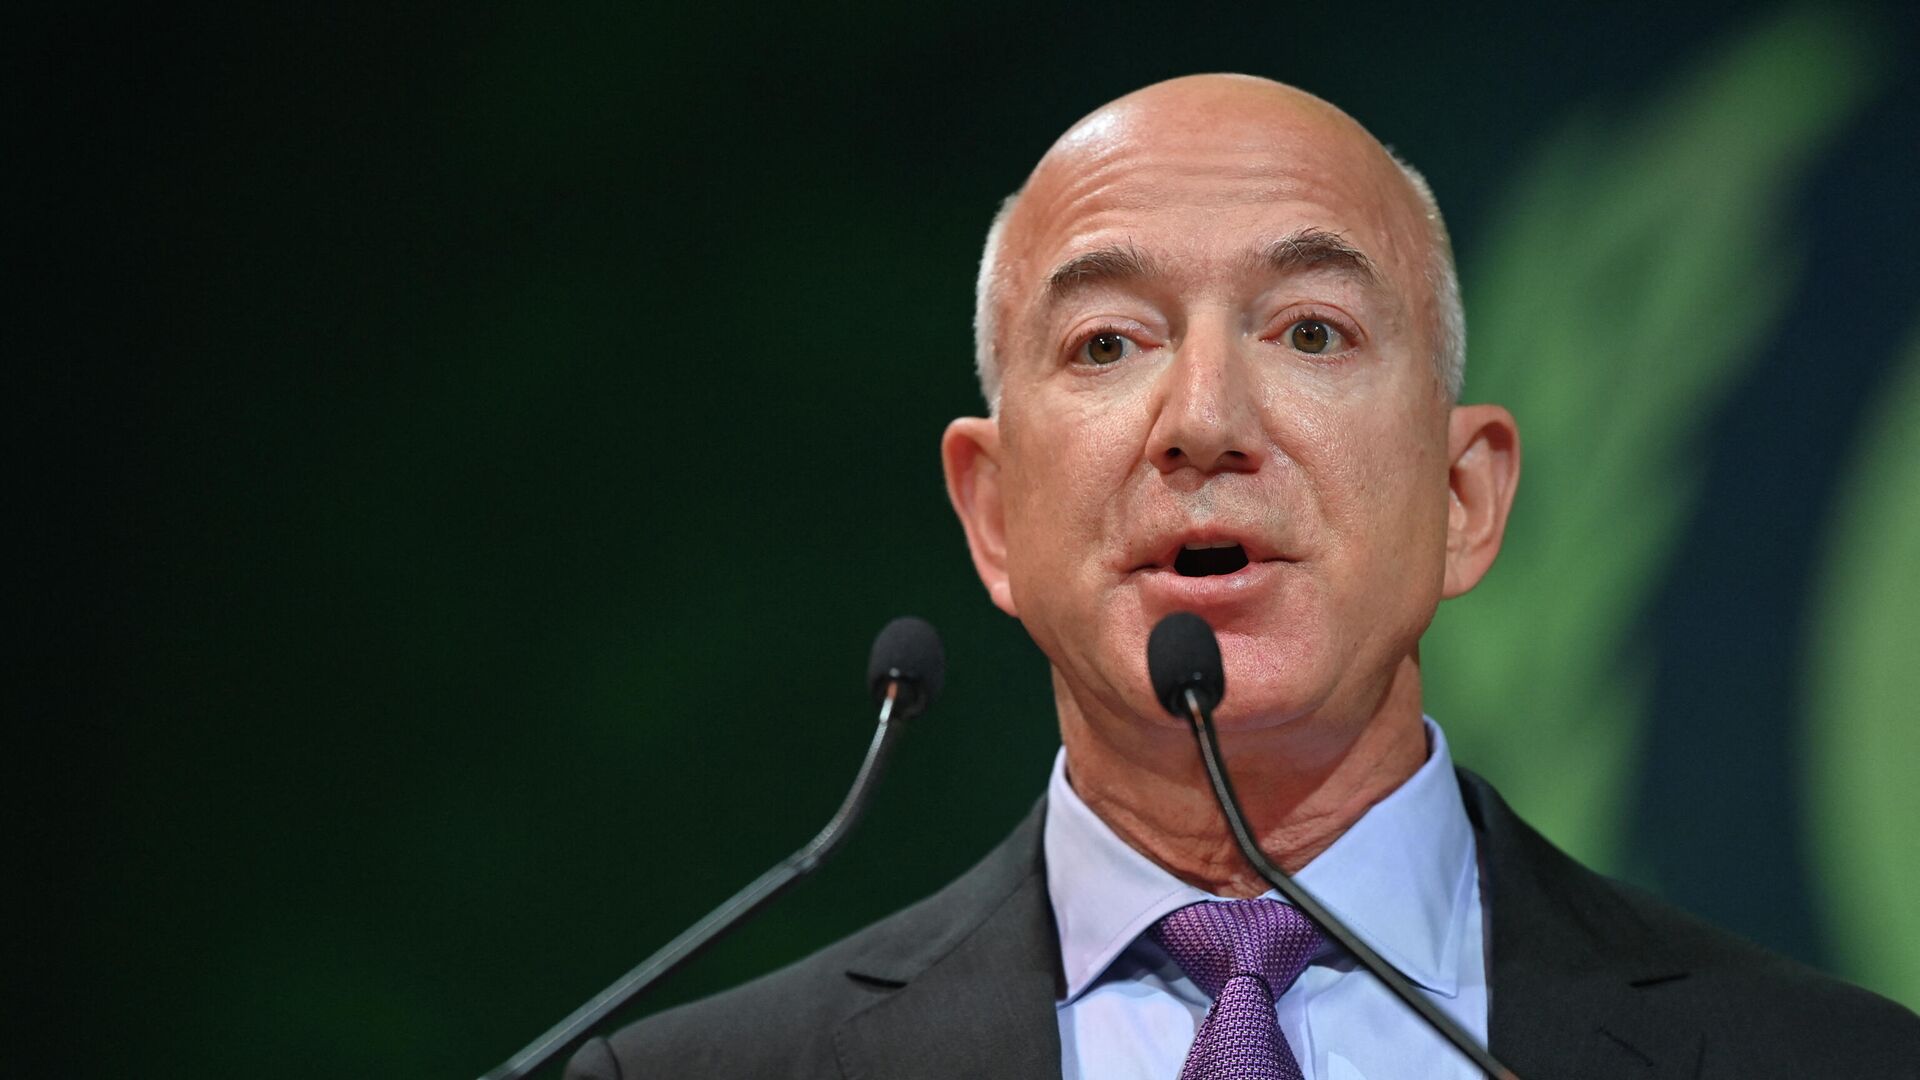 US CEO of Amazon Jeff Bezos attends an Action on Forests and Land Use session, during the COP26 UN Climate Change Conference in Glasgow, Scotland on November 2, 2021. - Sputnik International, 1920, 14.05.2022